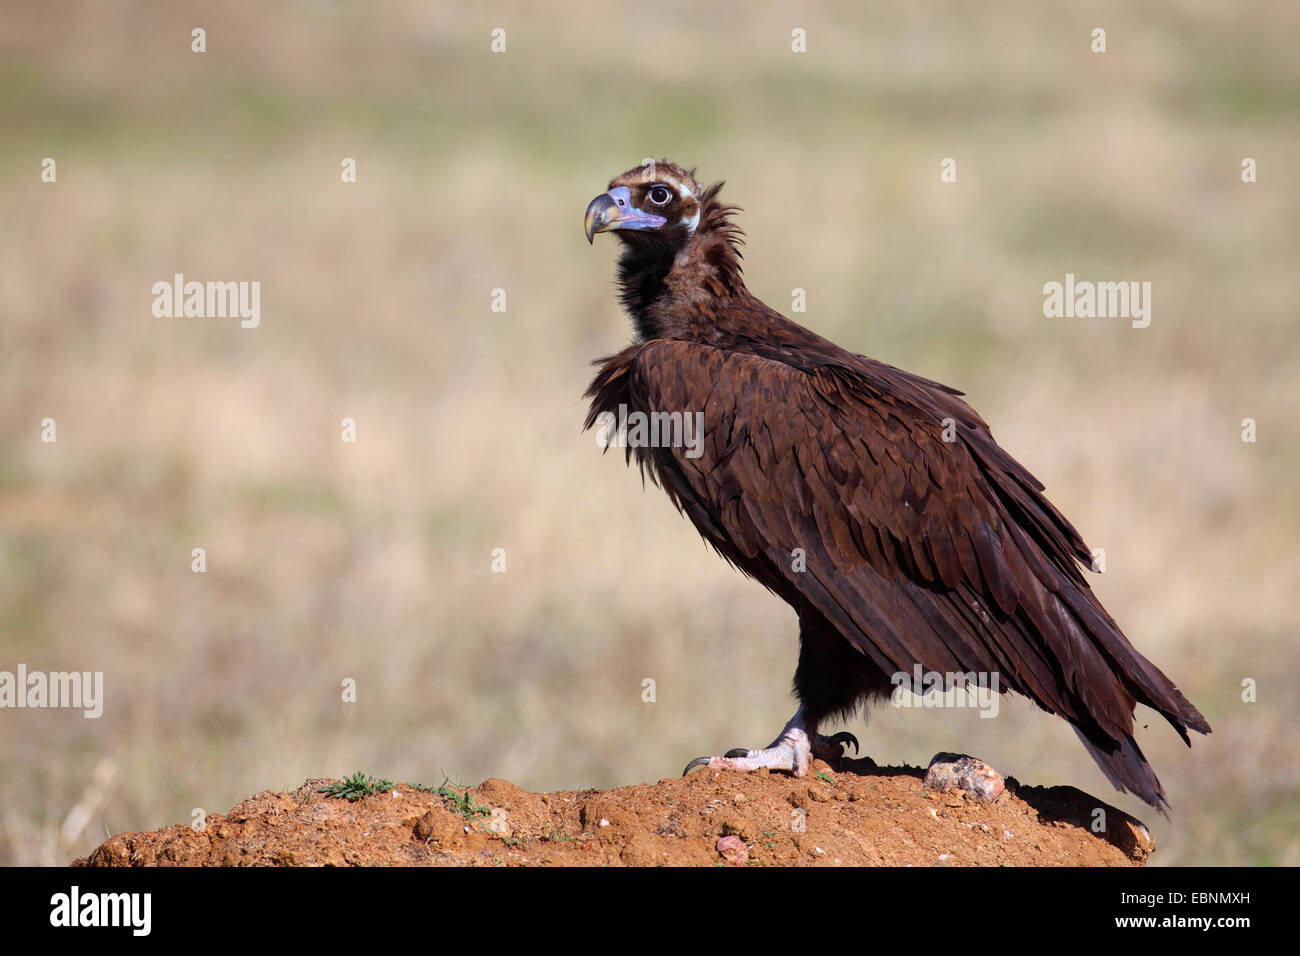 cinereous vulture (Aegypius monachus), adult vulture stands on the ground, Spain, Extremadura Stock Photo